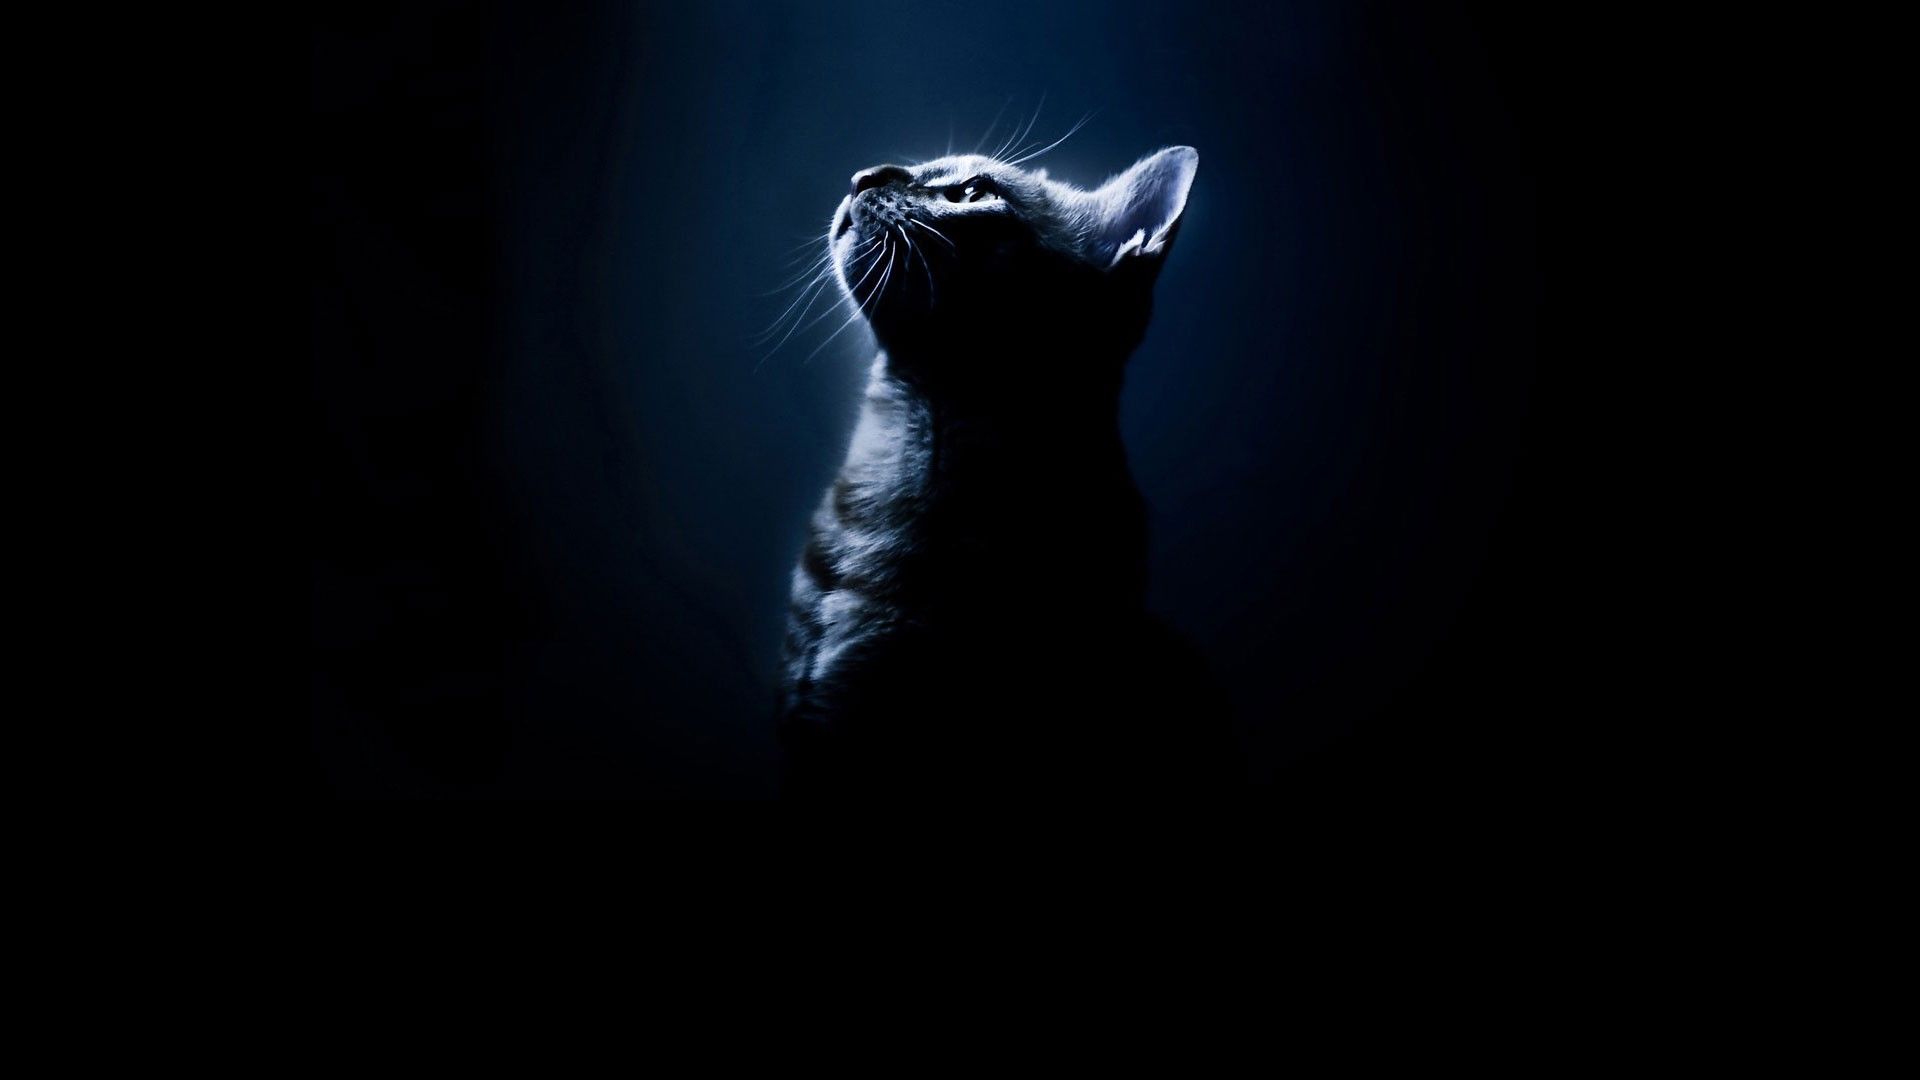 Black cats animals silhouettes black background wallpaperx1080